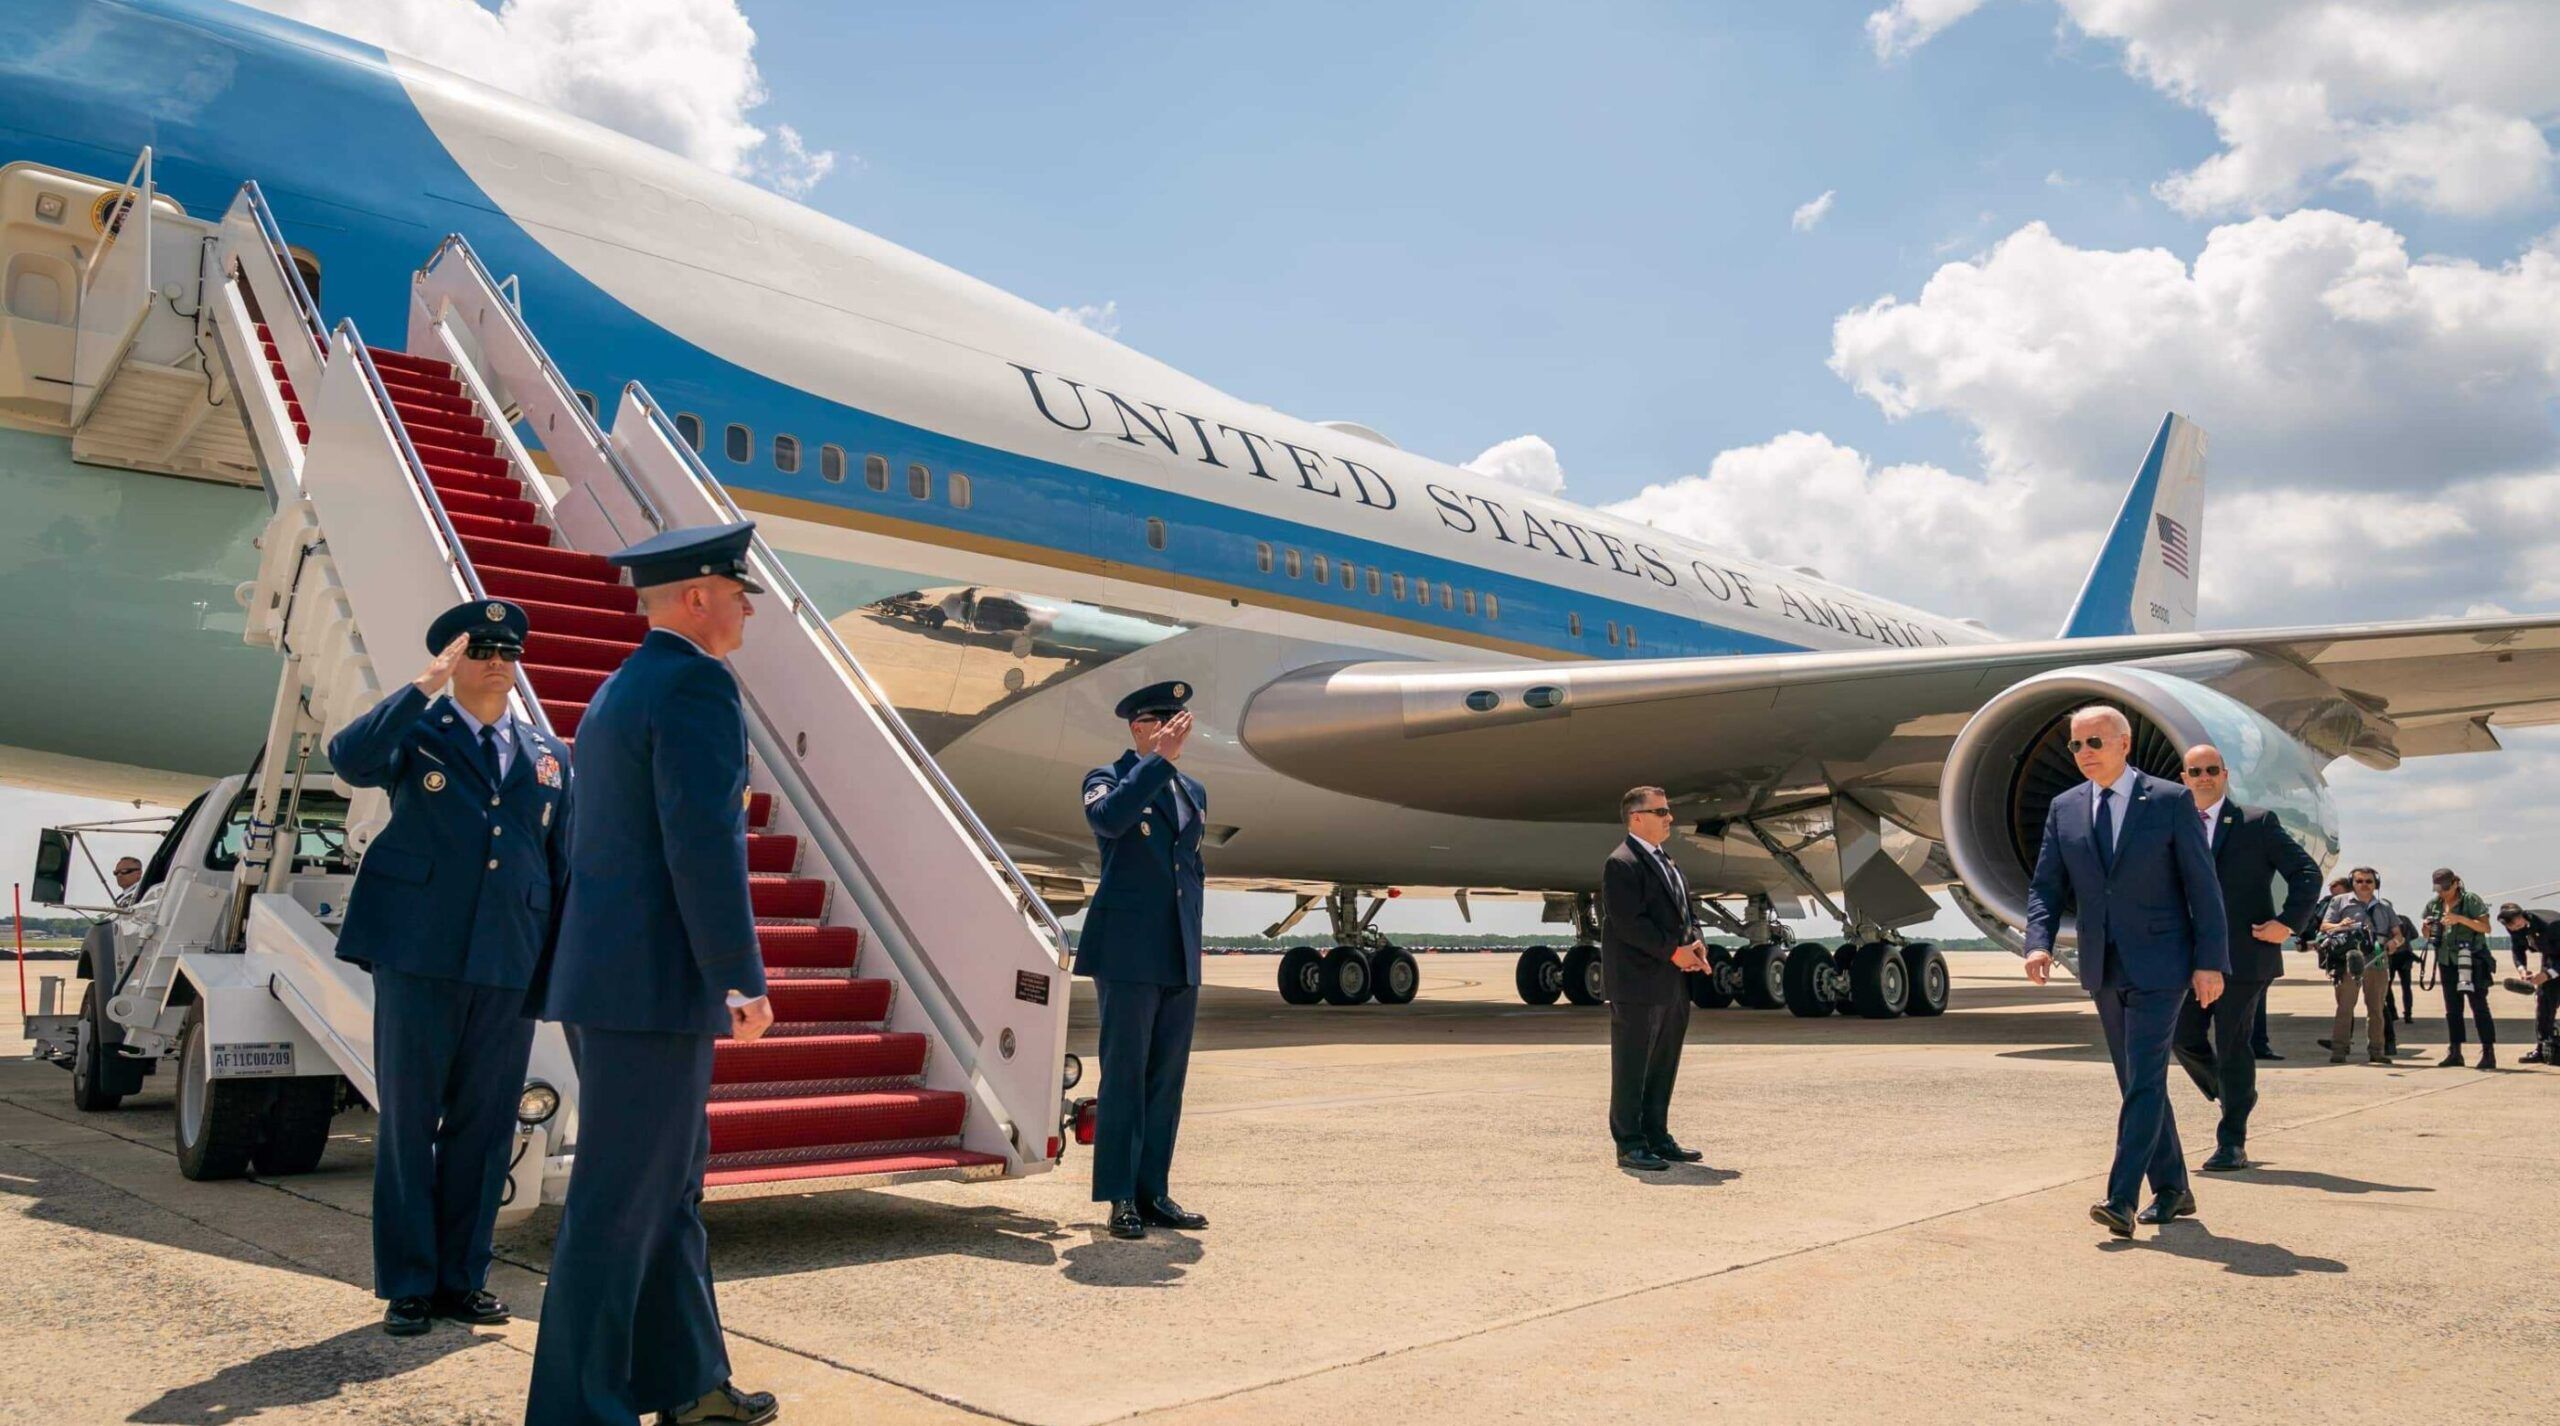 Why Biden Trashed Trump's Design For The New Air Force One